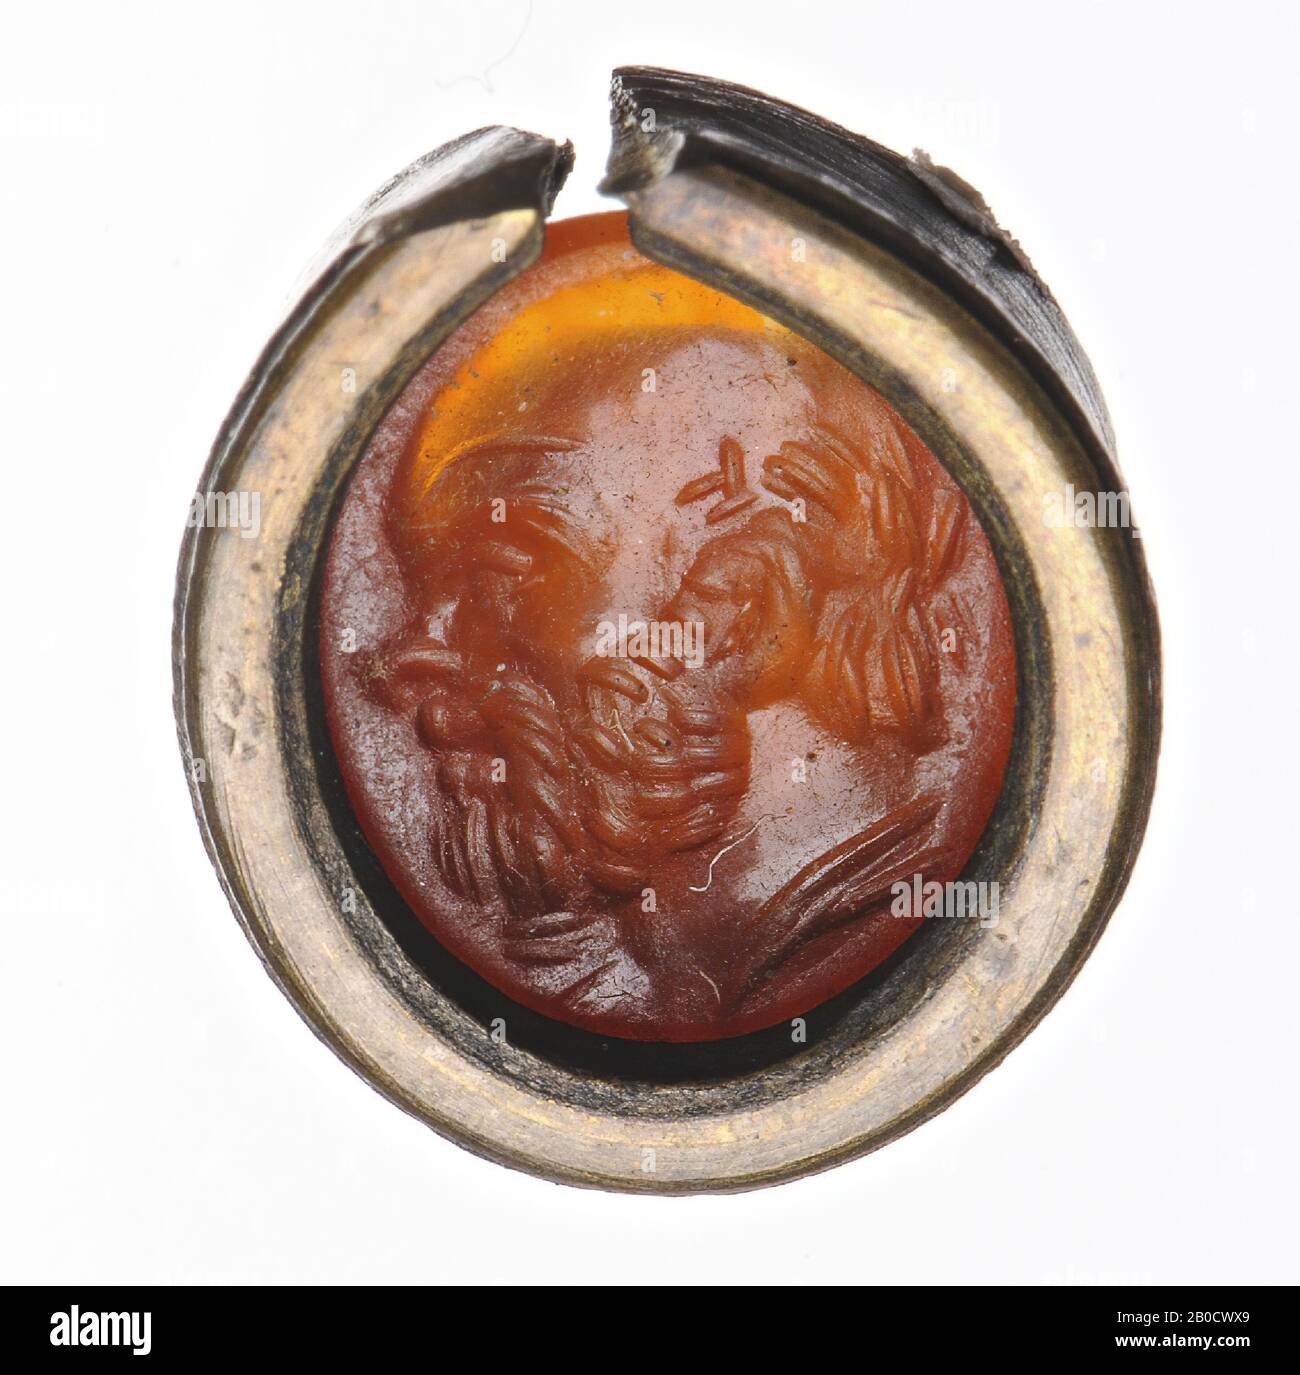 Vz: the bald and bearded head is part of a dressed bust., Gem, intaglio, ringstone, carnelian, Color: orange-red, Shape: oval, Processing: in modern copper setting, Method: modeling with large rounded drill , detailing with short rounded wheel grooves., 11.5 x 10 mm, D. 2 mm, 2nd half 1st century BC. -50 Stock Photo